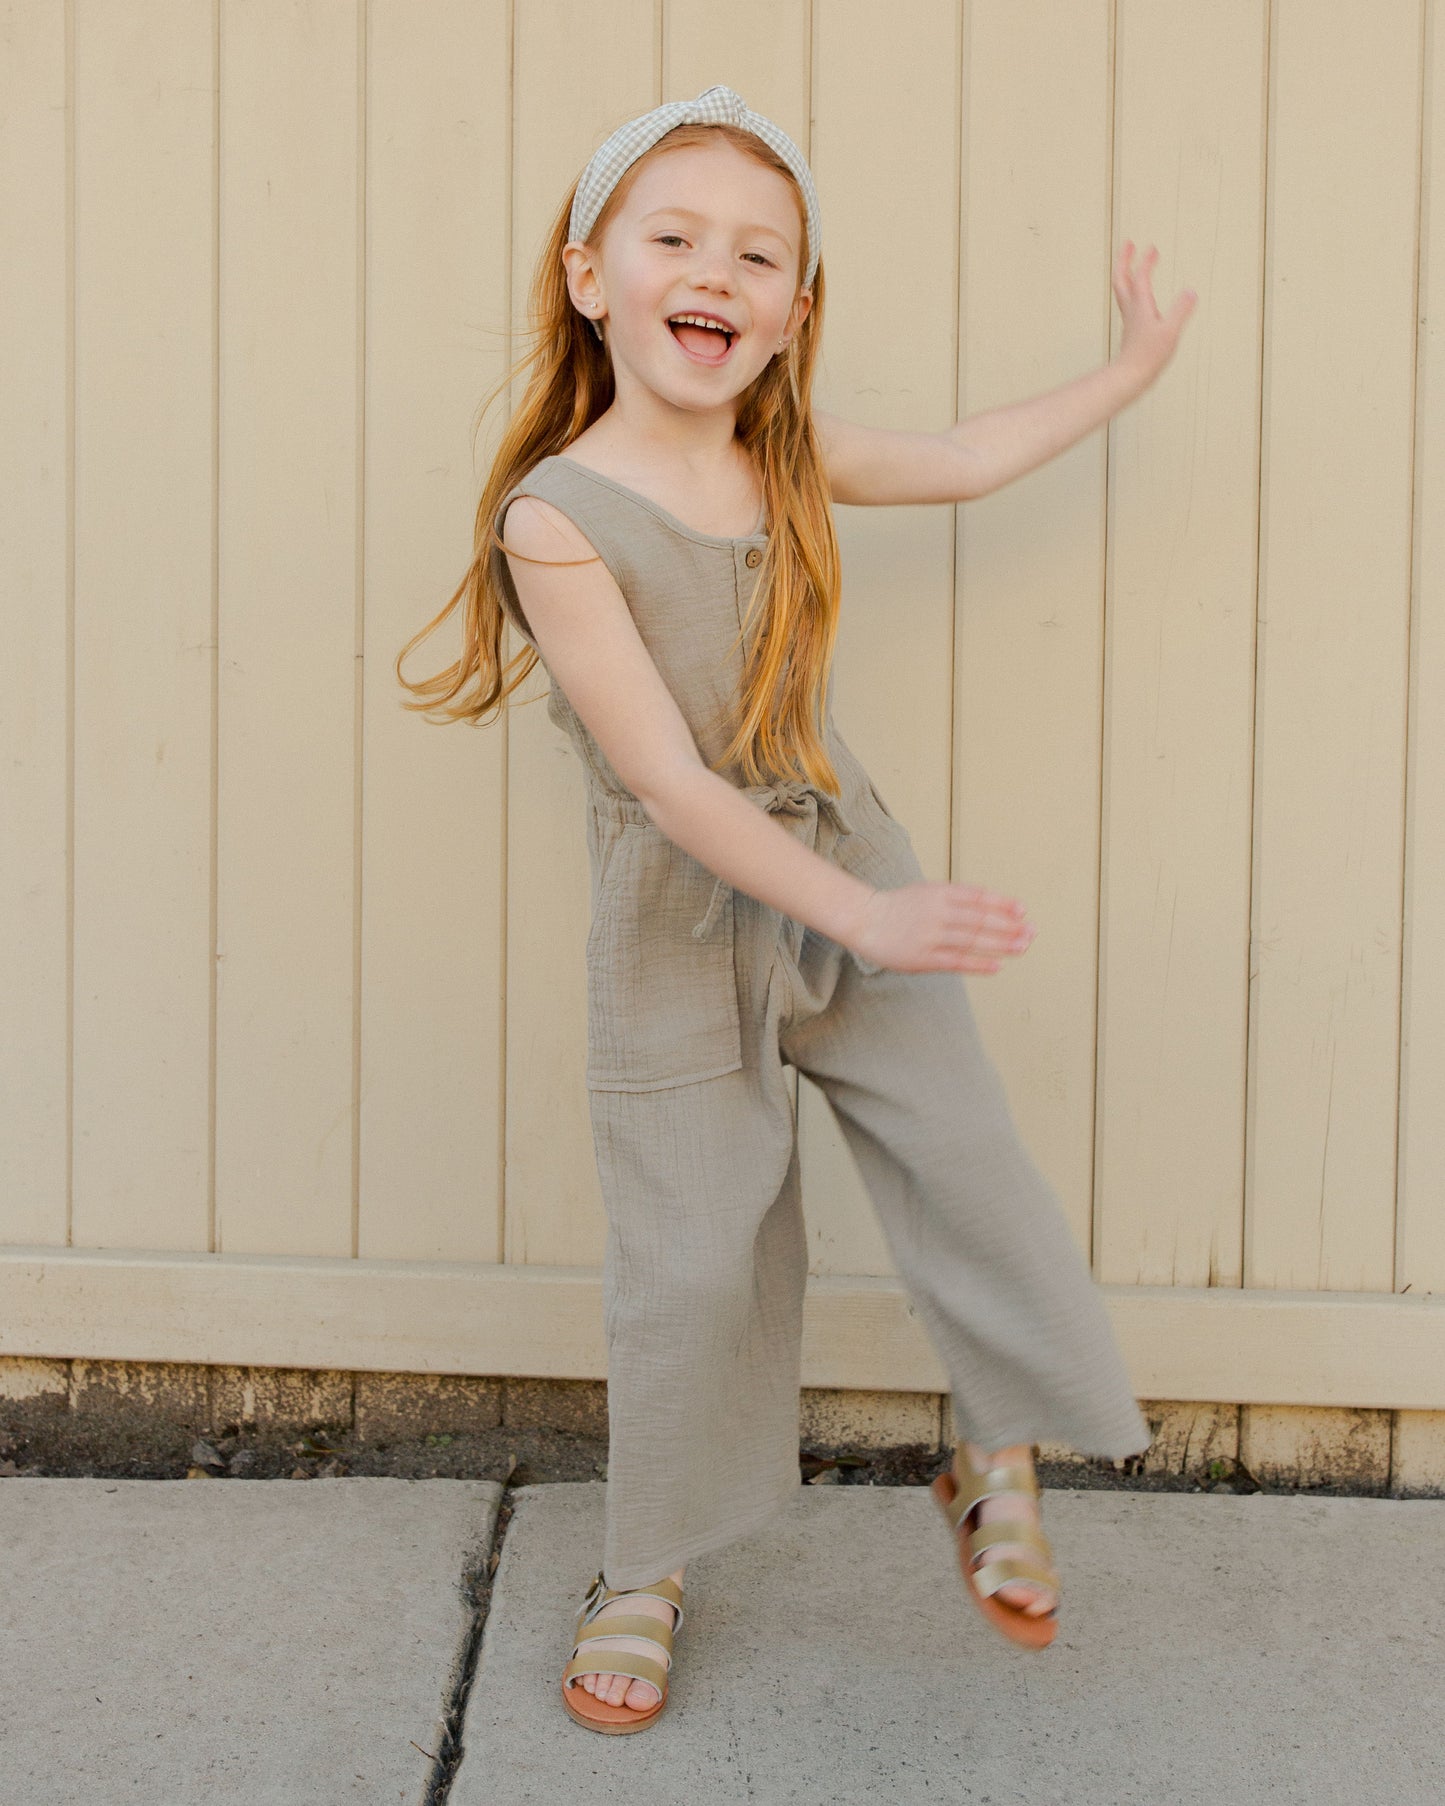 Charlee Jumpsuit || Sage - Rylee + Cru | Kids Clothes | Trendy Baby Clothes | Modern Infant Outfits |